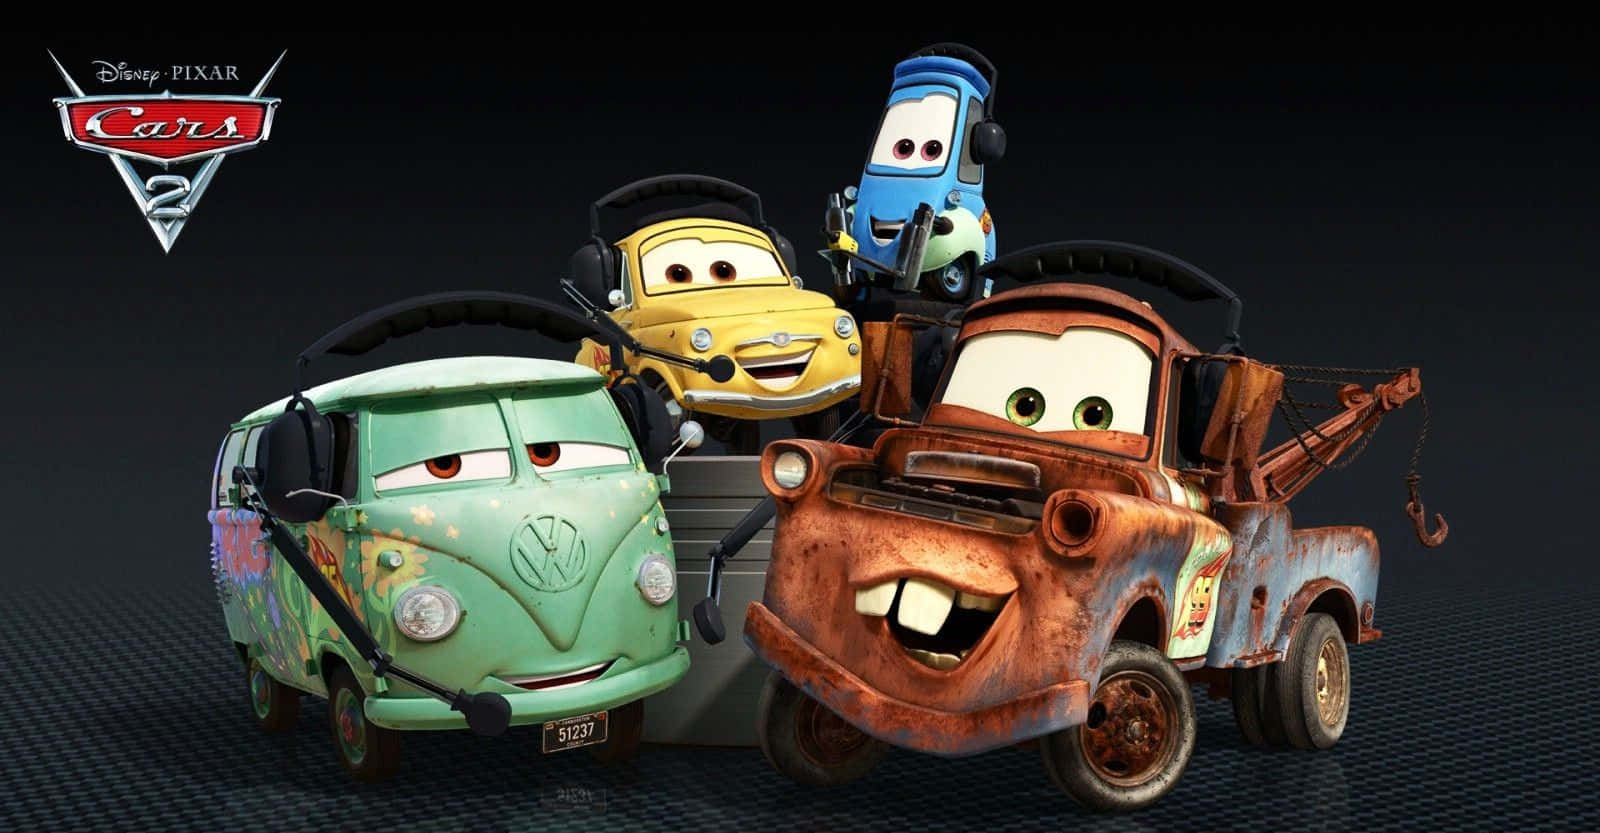 A Race to the Finish: Pixar's Cars 2